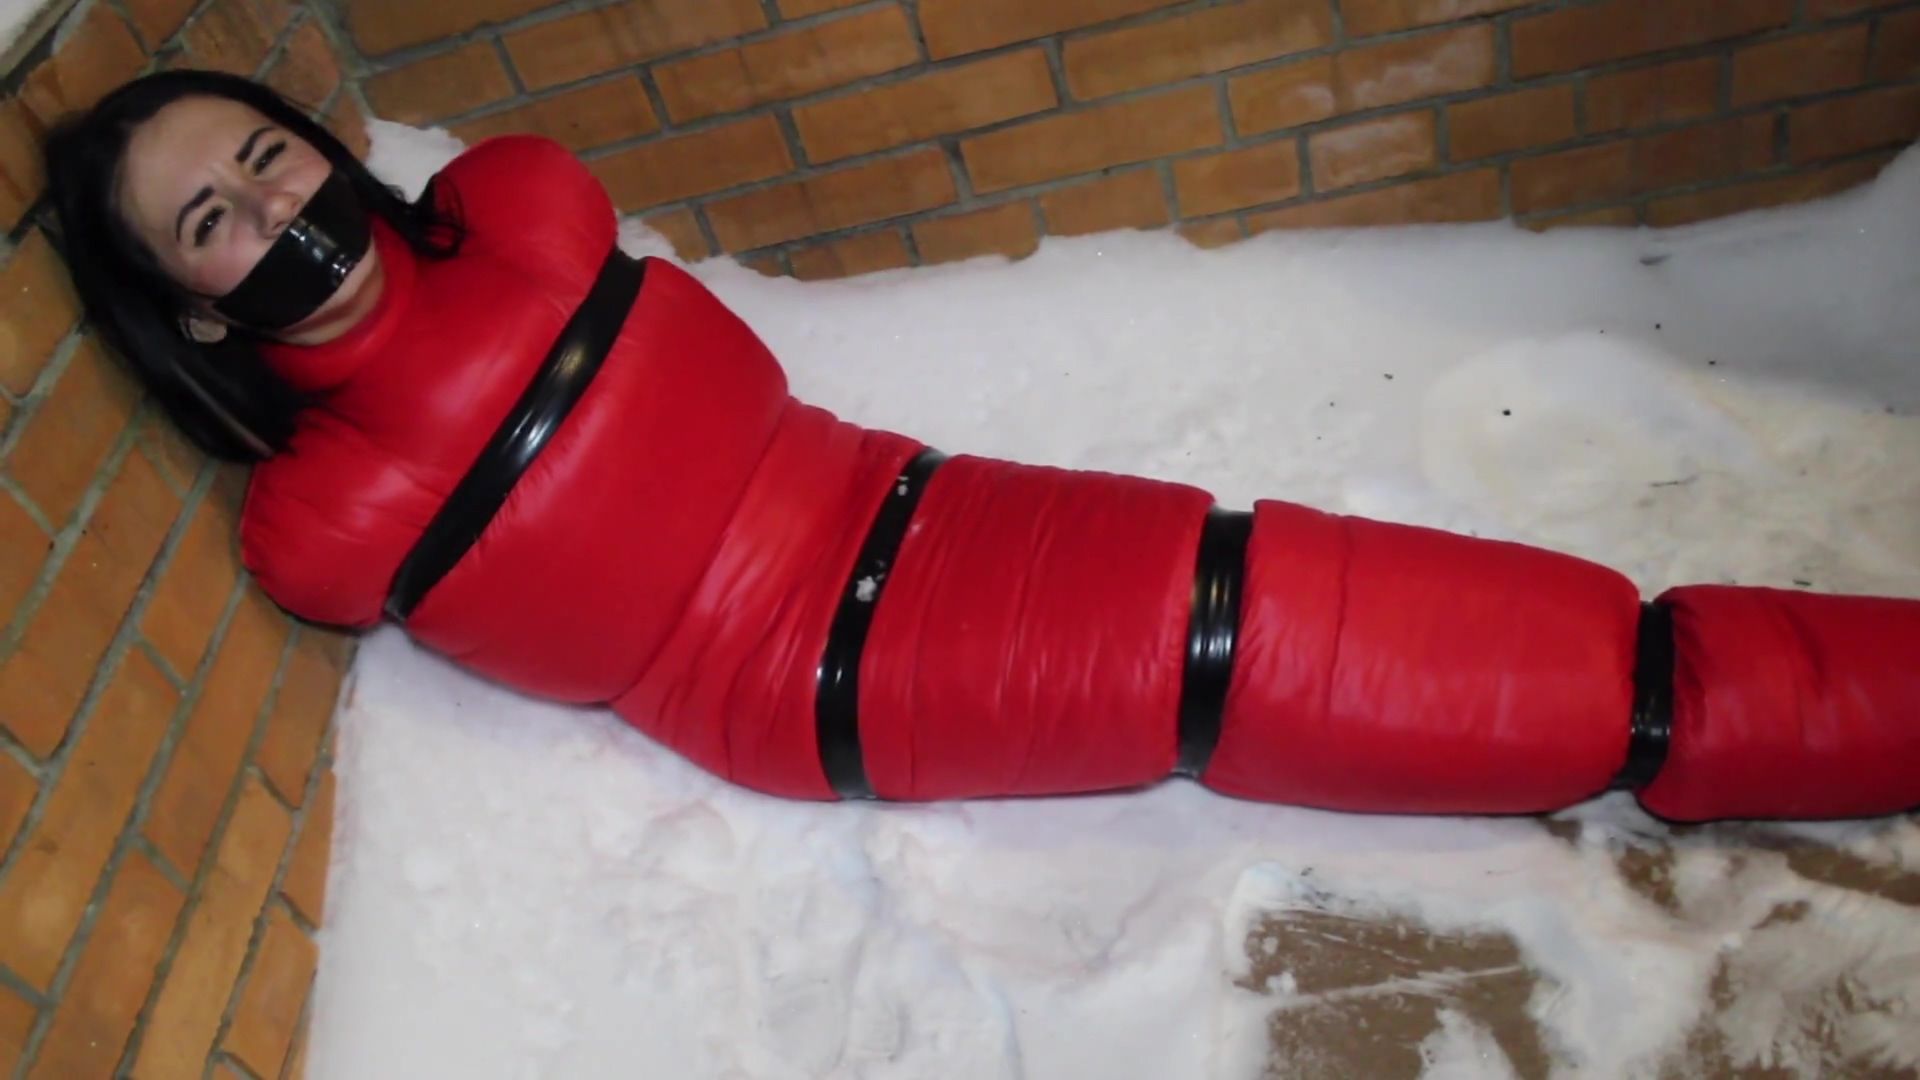 Blowjob Left Outside In Red Bag Badoo - 1